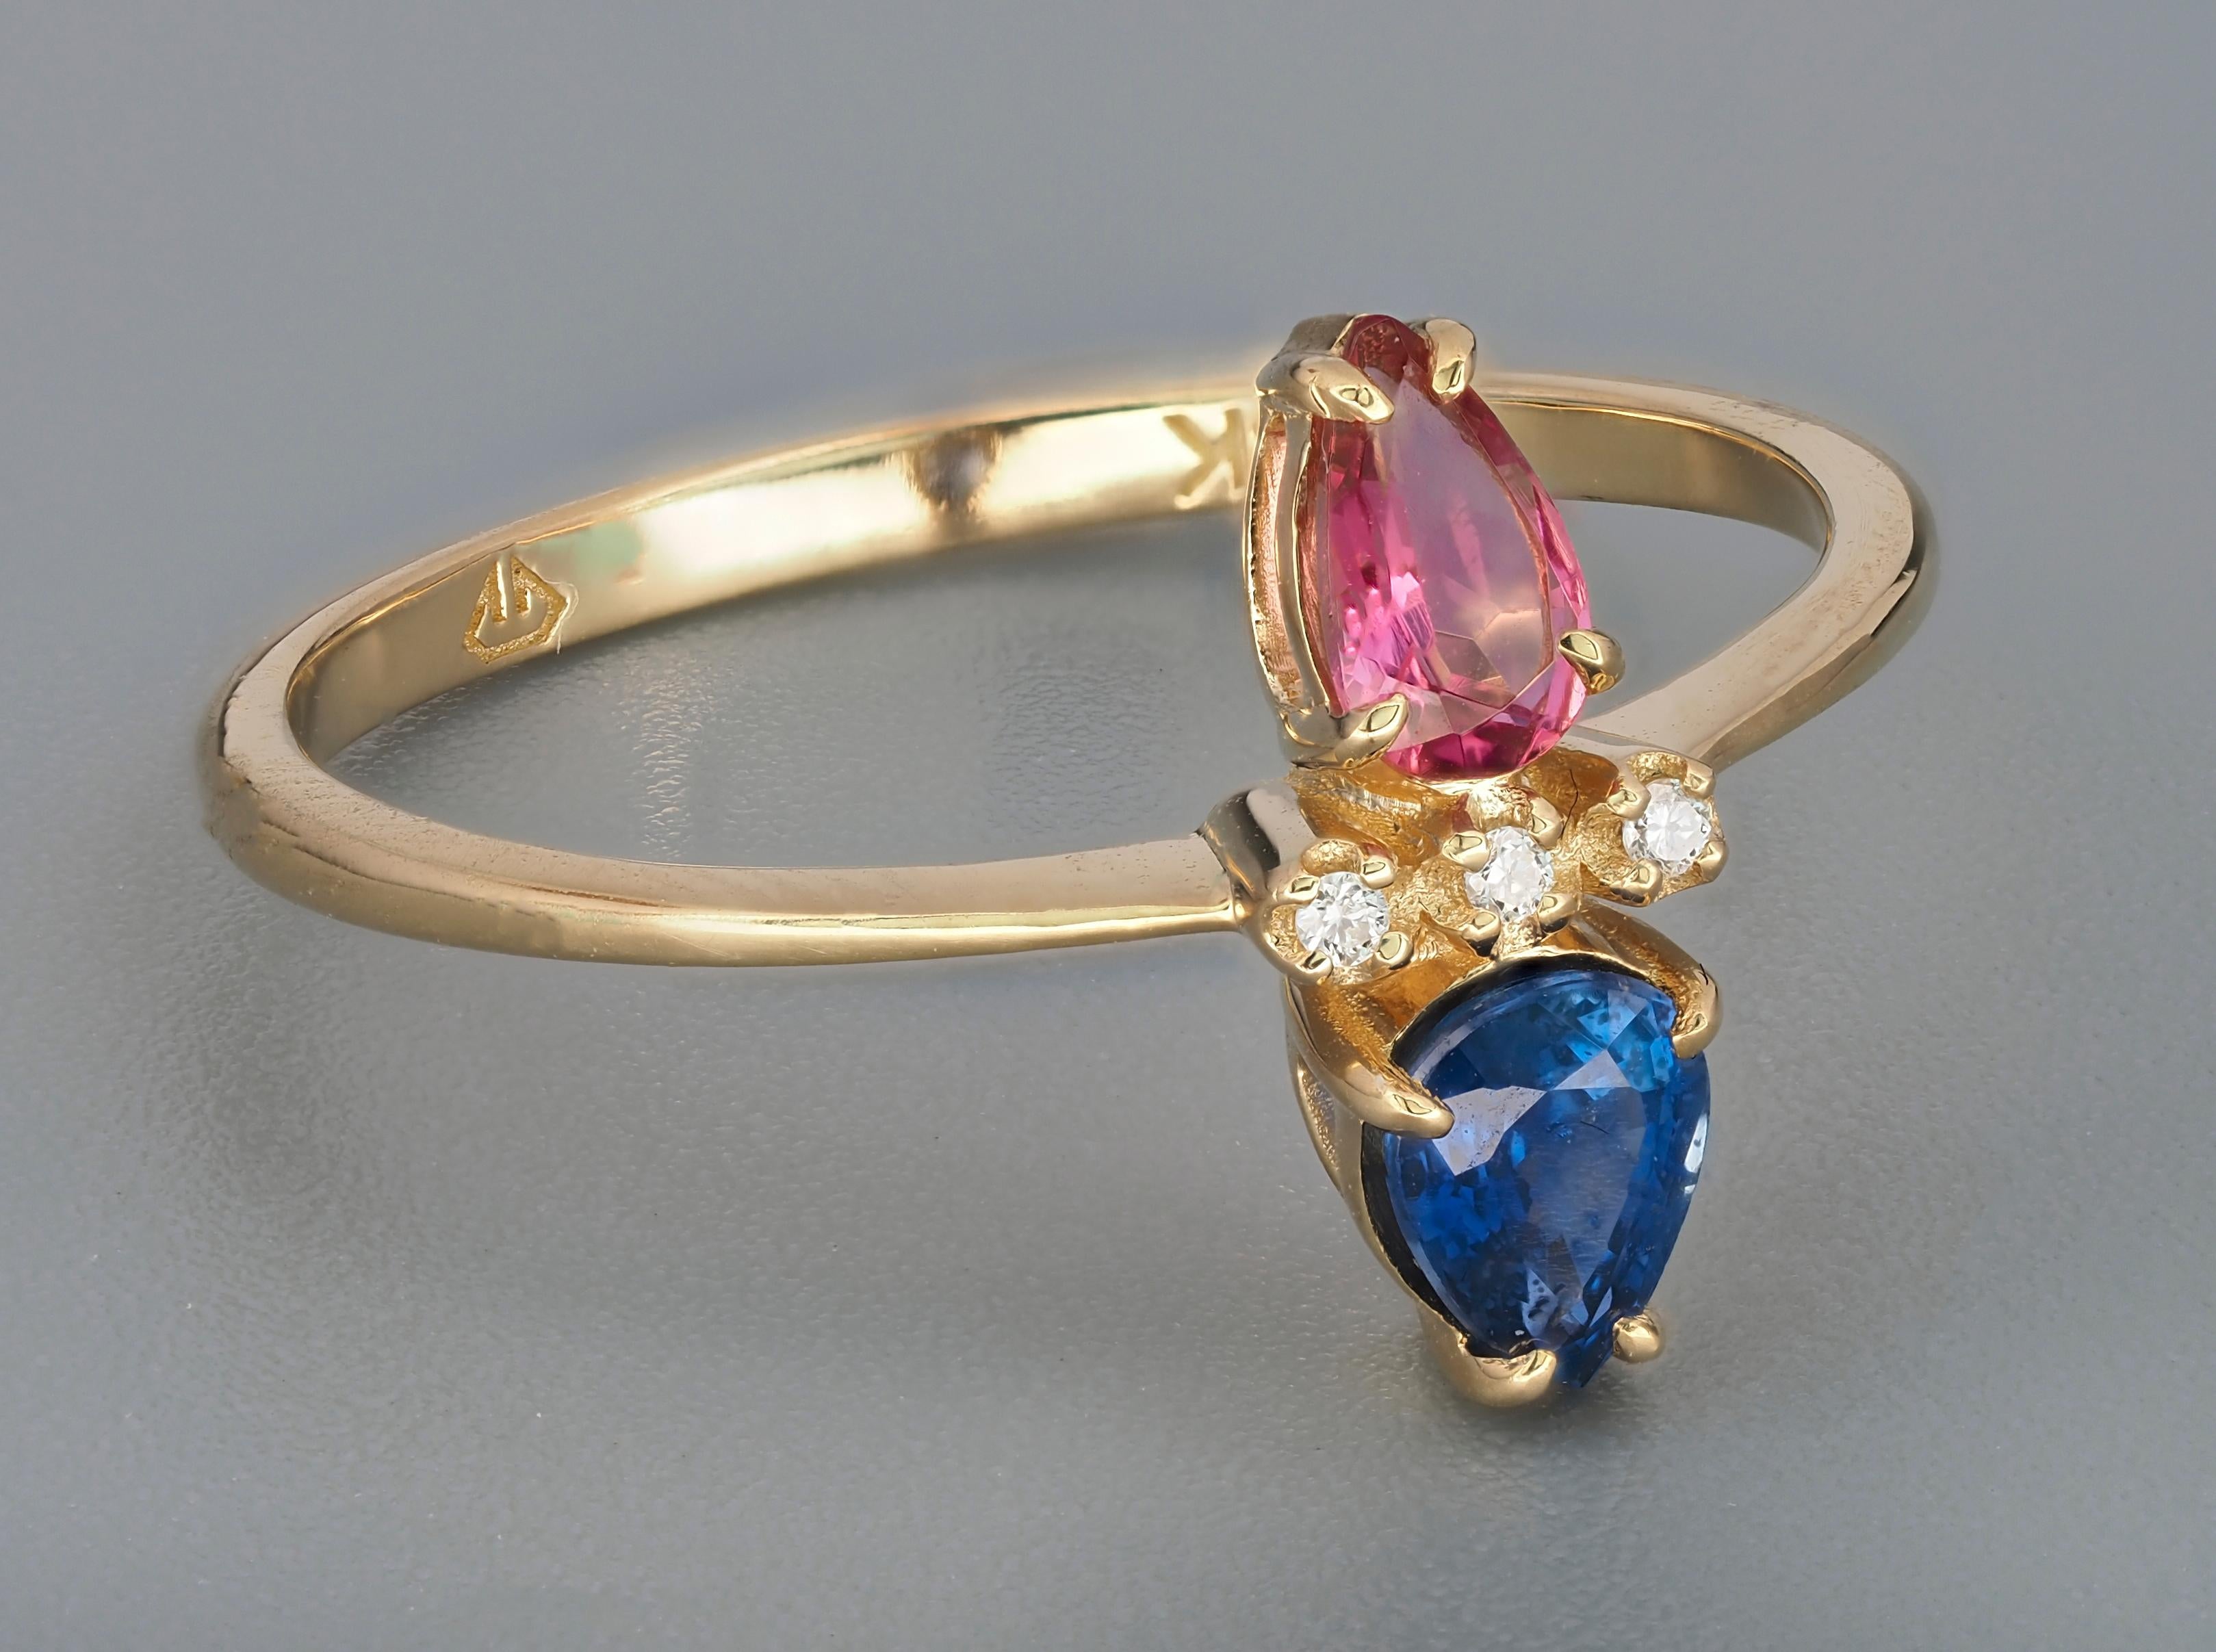 For Sale:  14k Gold Ring in Art Deco Style with Central Sapphire, Tourmaline and Diamonds 2